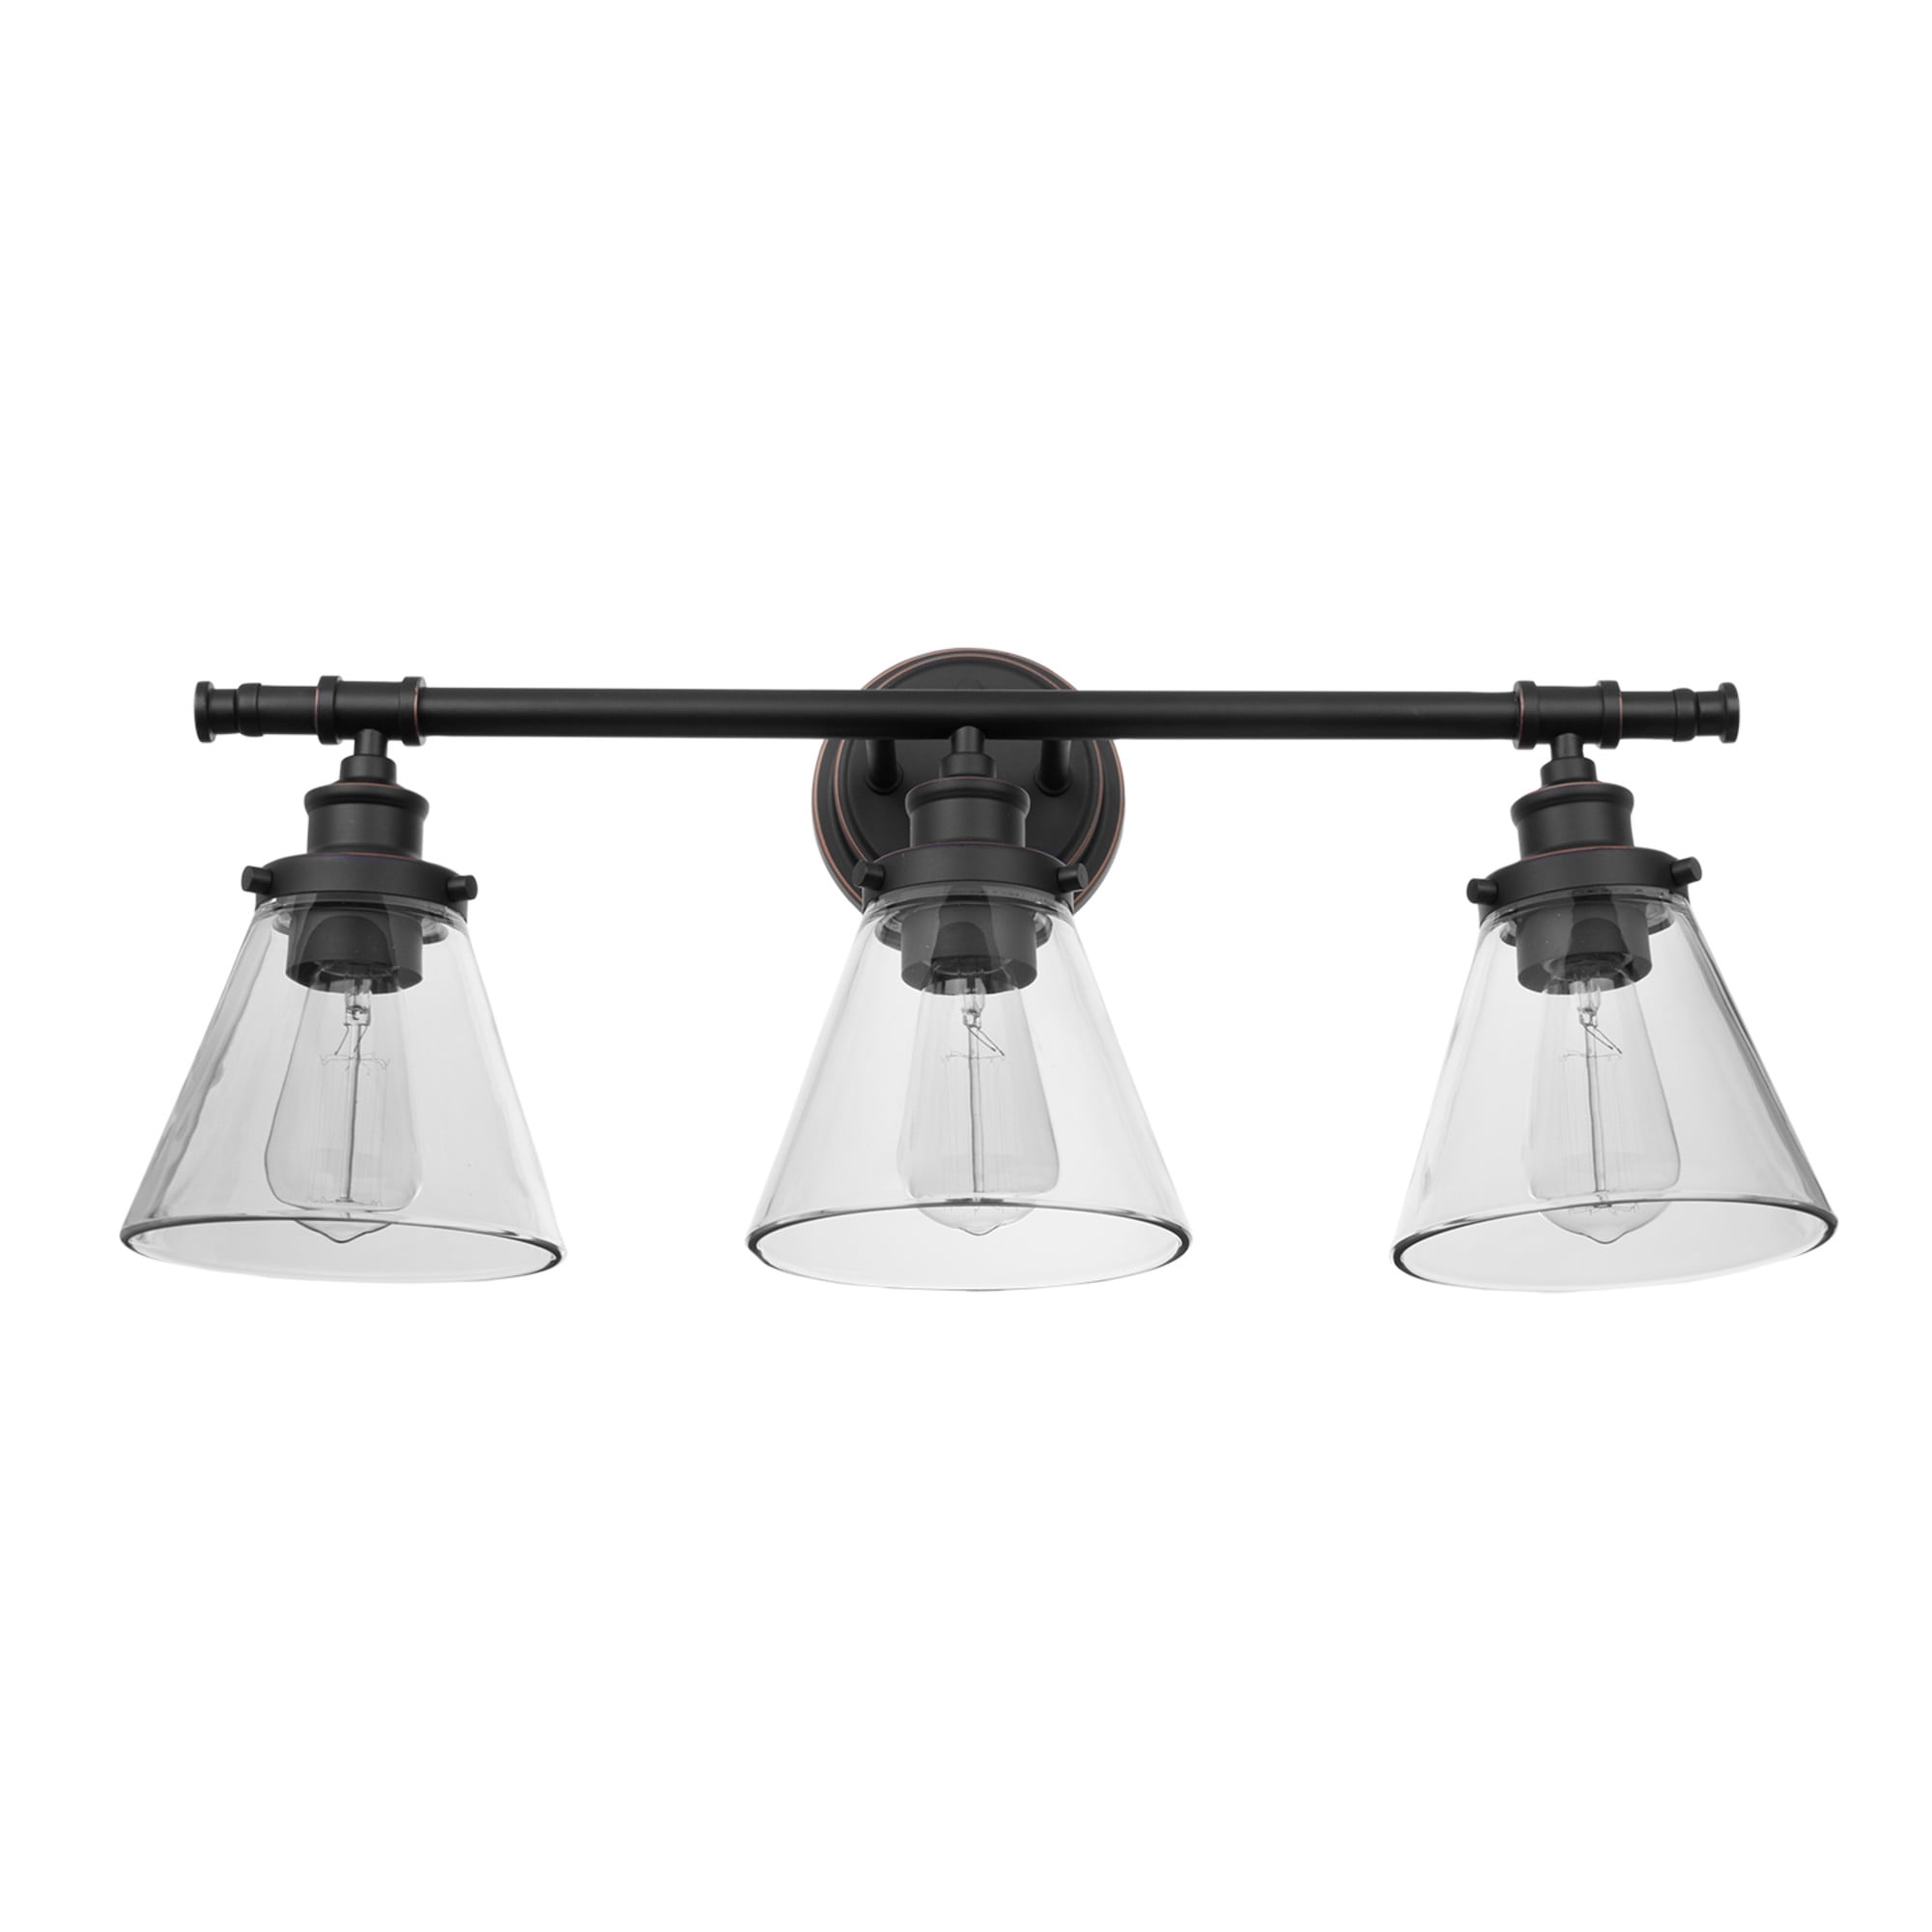 51445 Globe Electric Parker 3-Light Chrome Vanity Light with Clear Glass Shades 